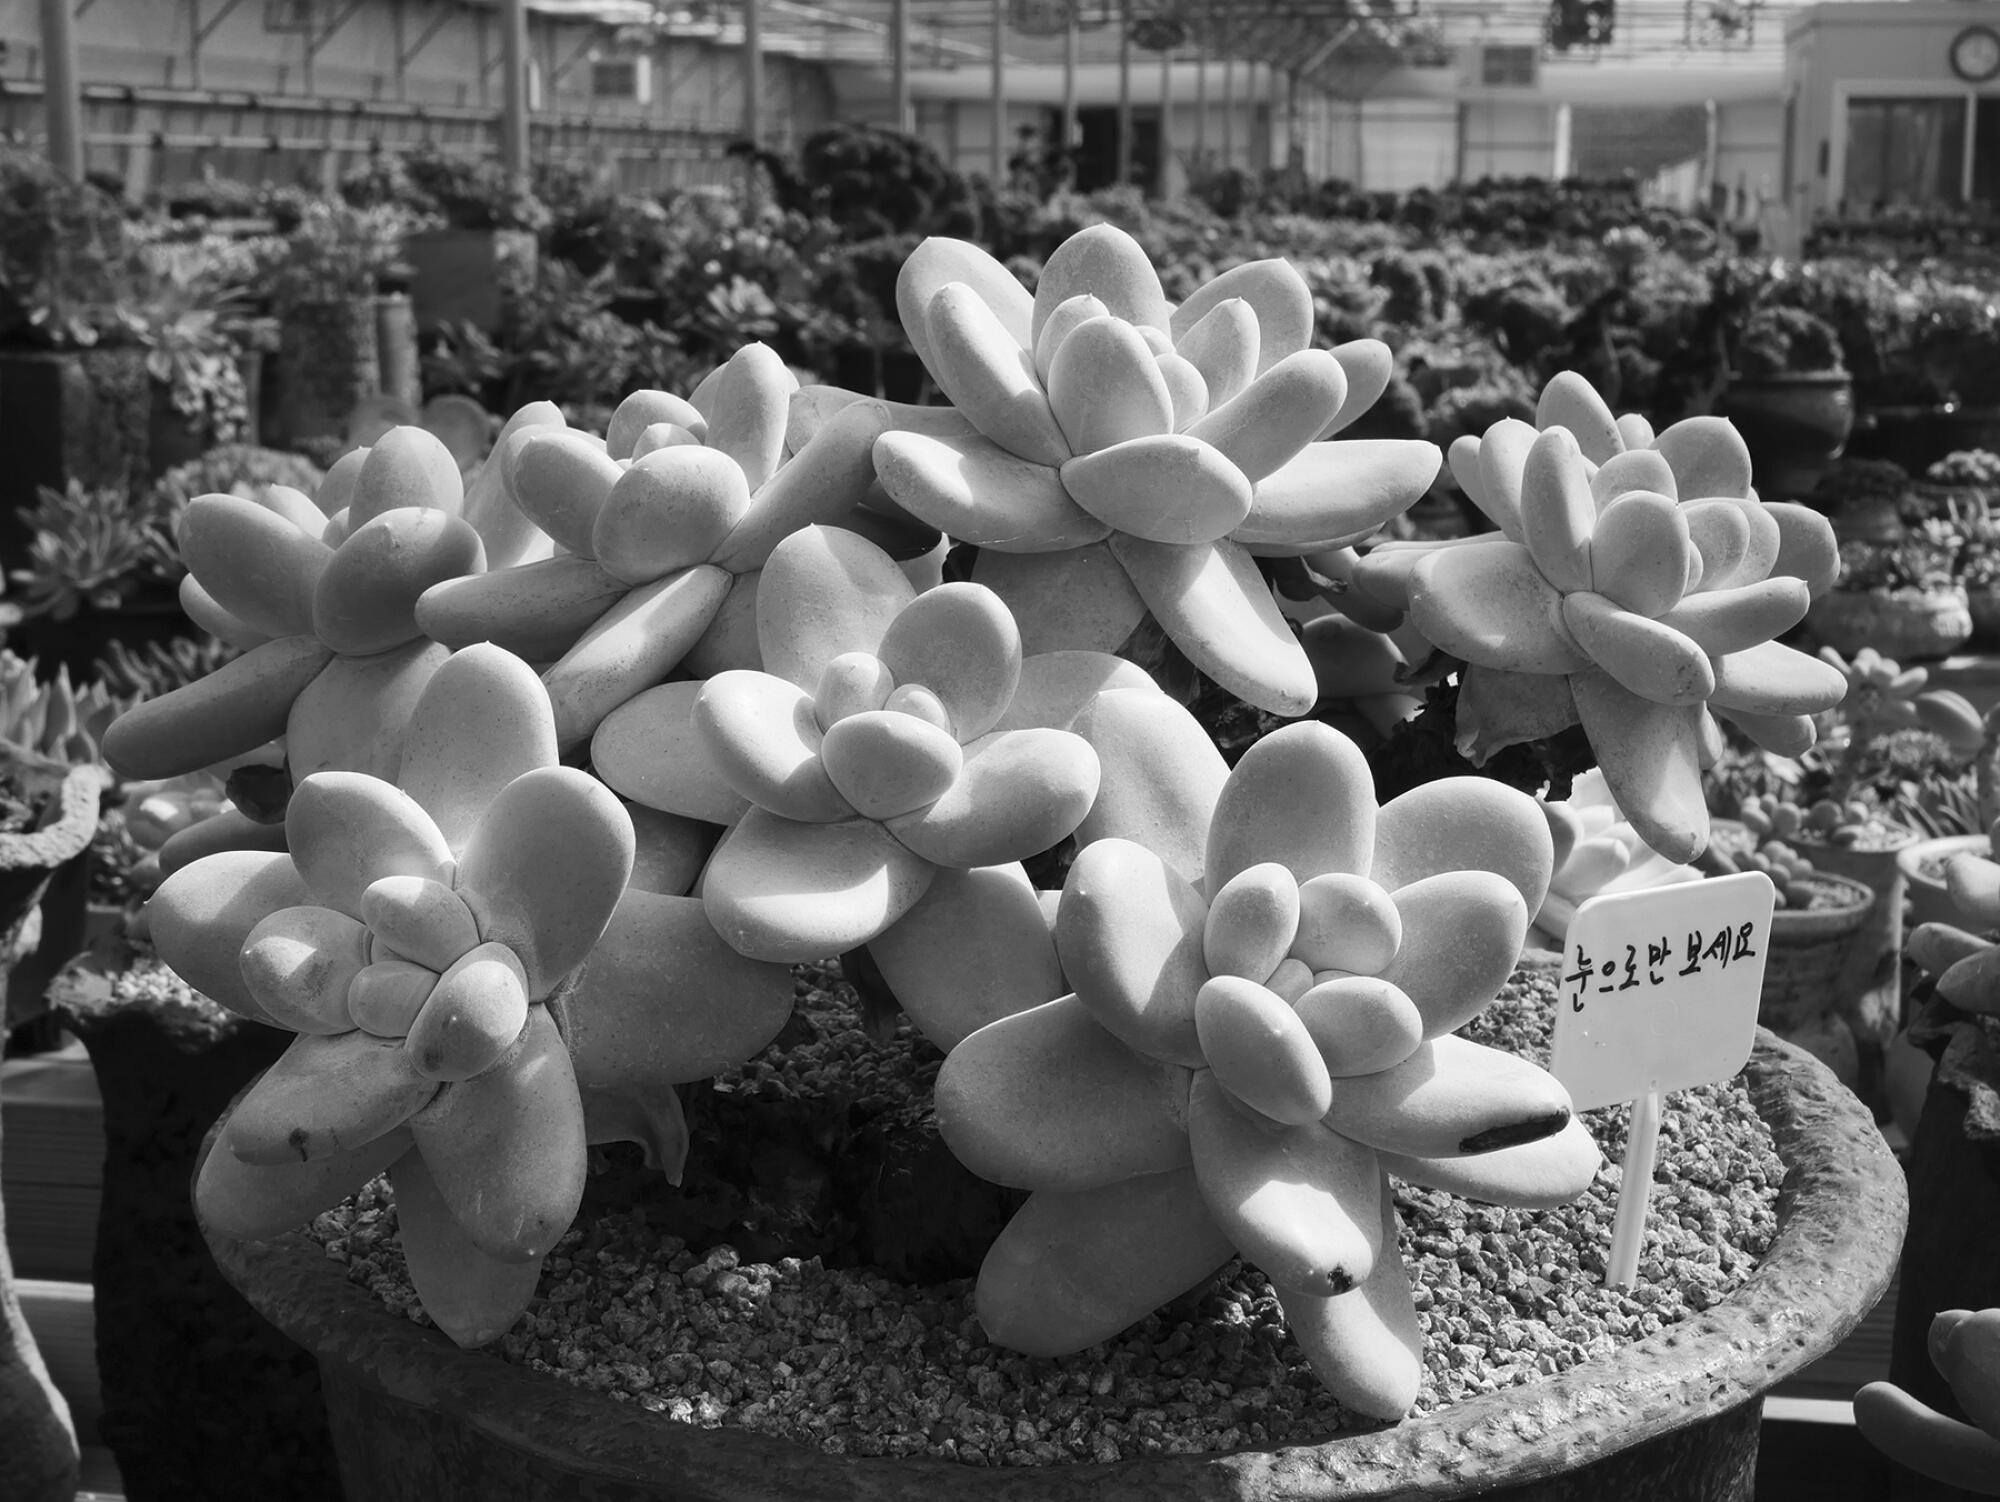 A large, beautiful and rare succulent in a South Korean market.